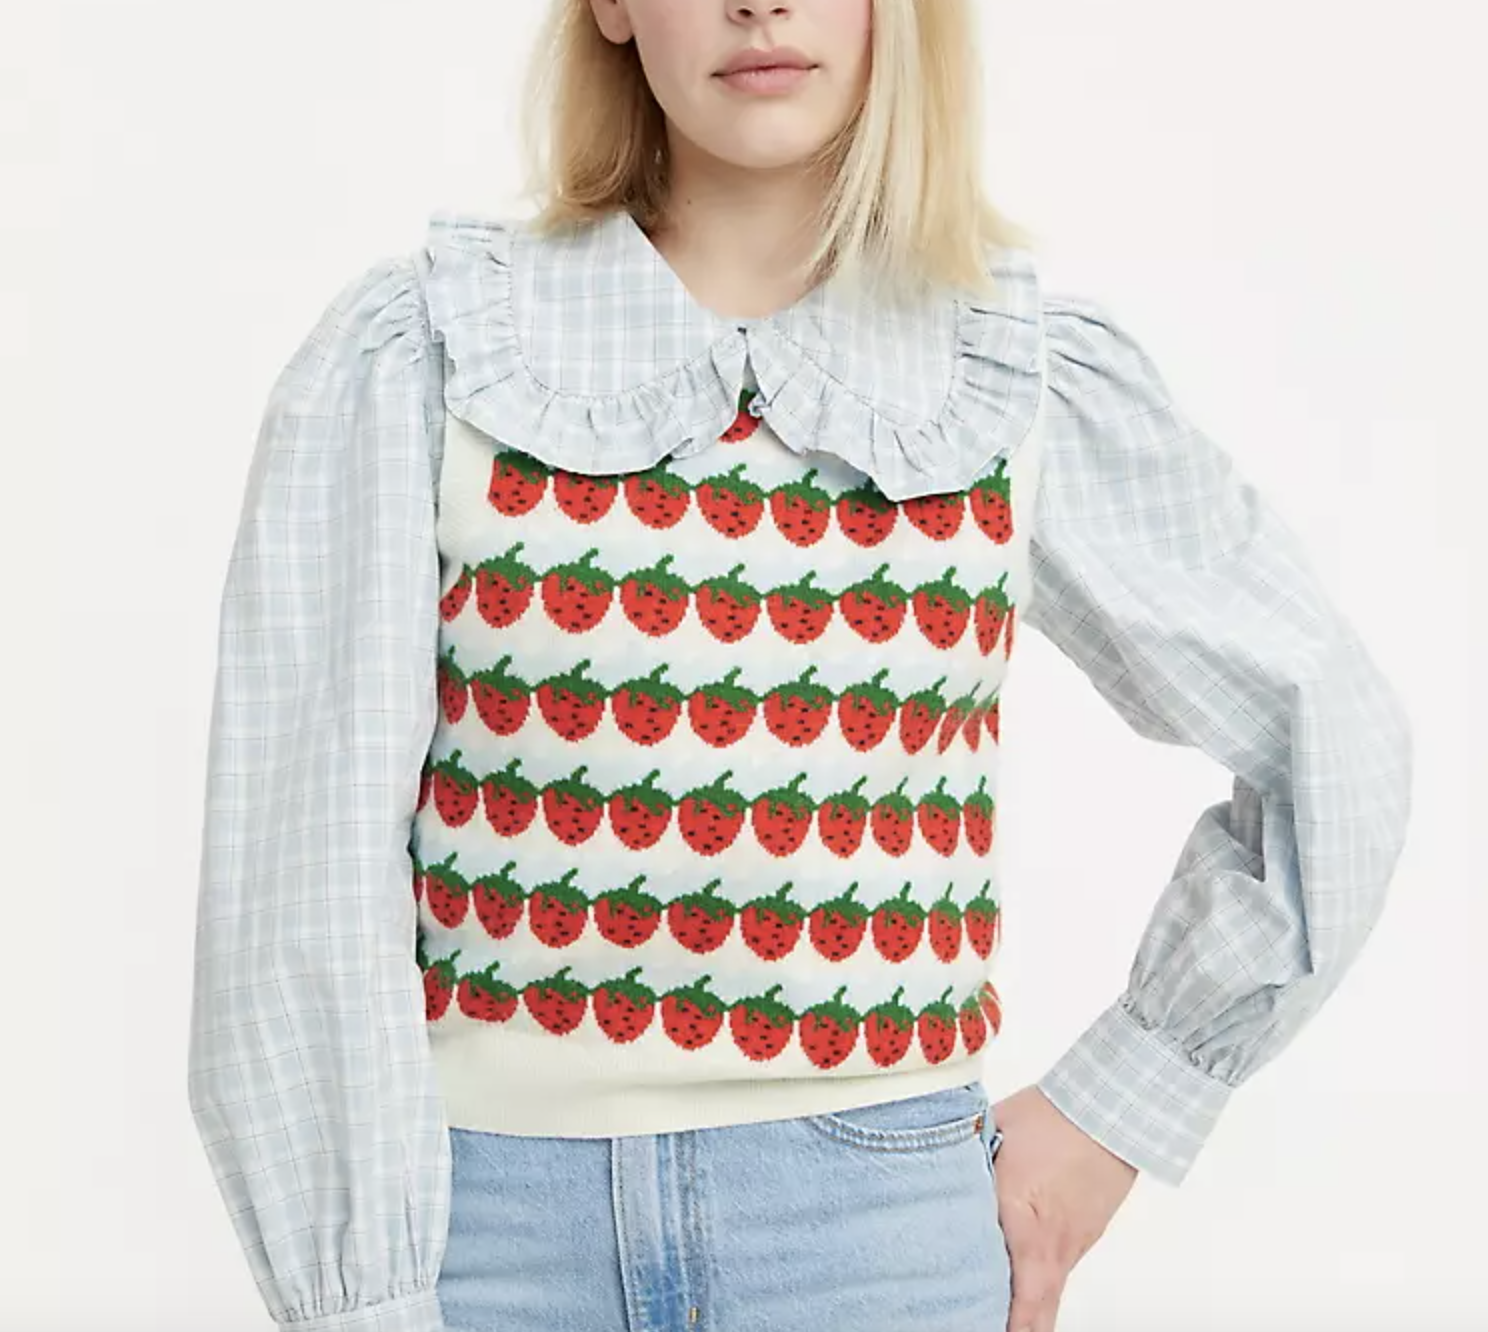 A model wearing the strawberry sweater vest